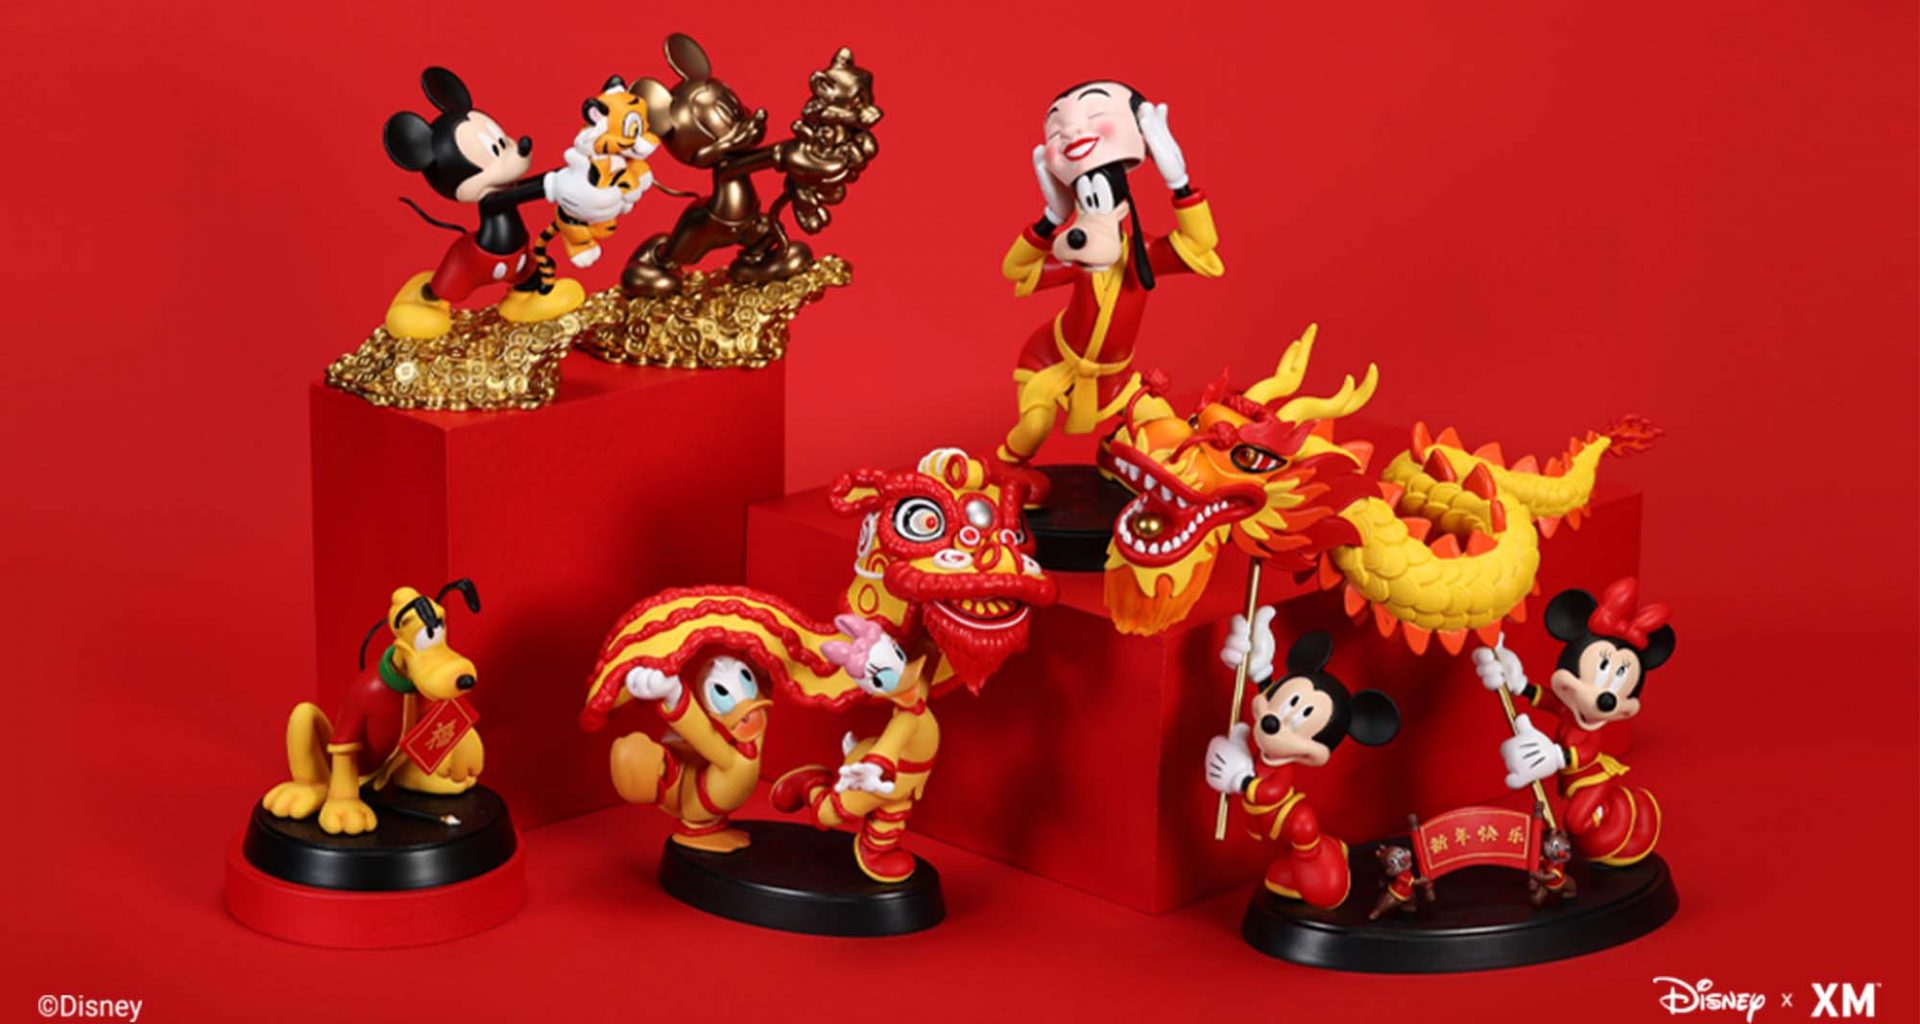 The Joy of Festival - Pop-up store at Floral Fantasy gift shop at Gardens by the Bay premieres the launch of Mickey & Friends collectibles by XM! - Alvinology